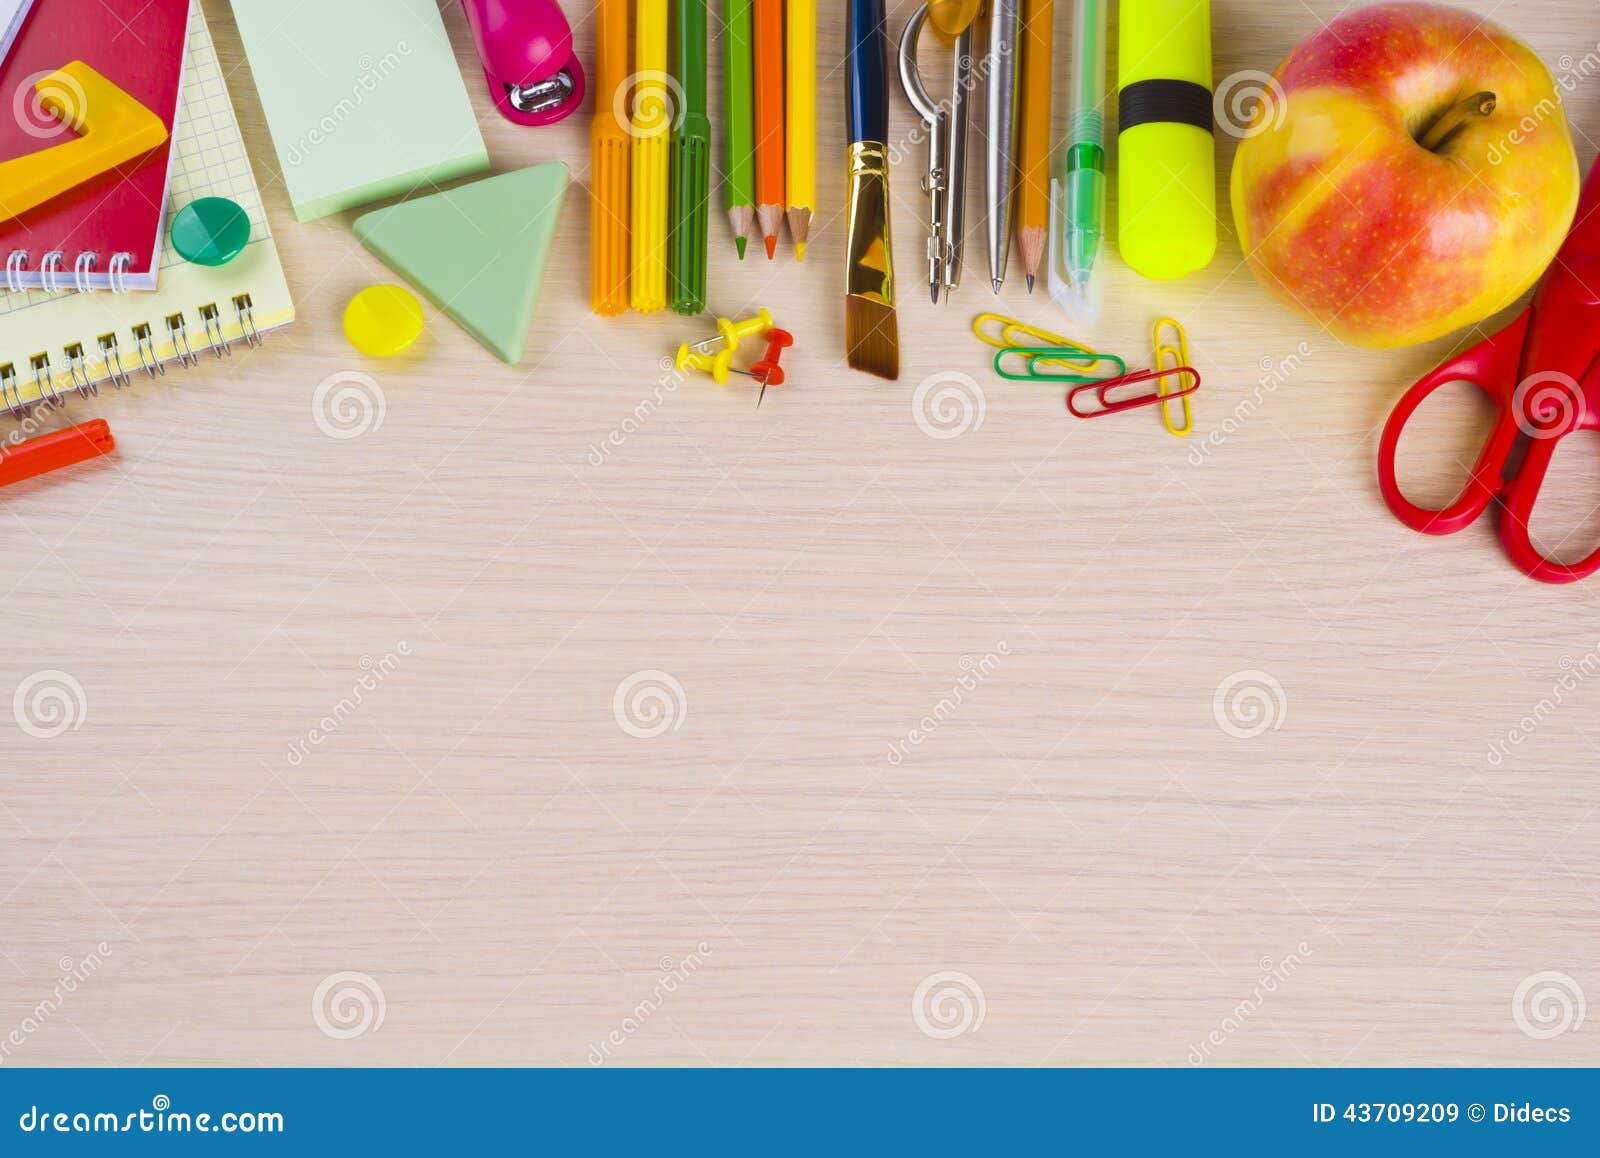 school stationery supplies on table